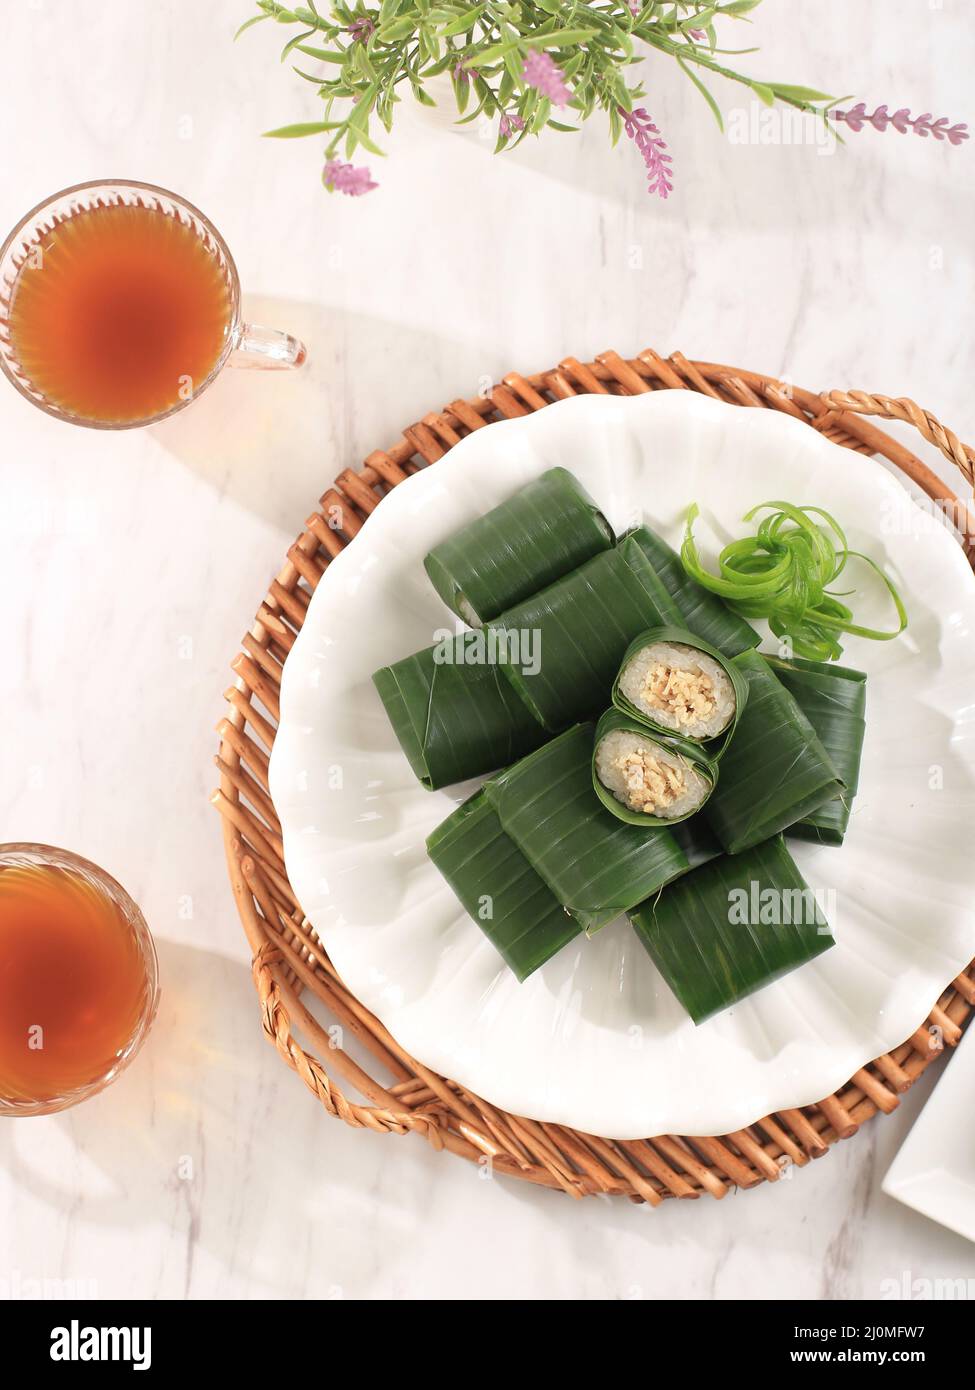 Top View Lemper Ayam, Steamed Glutinous Rice Filled with Shredded Chicken Wrapped in Banana Leaf on White Table. Served with Tea Stock Photo